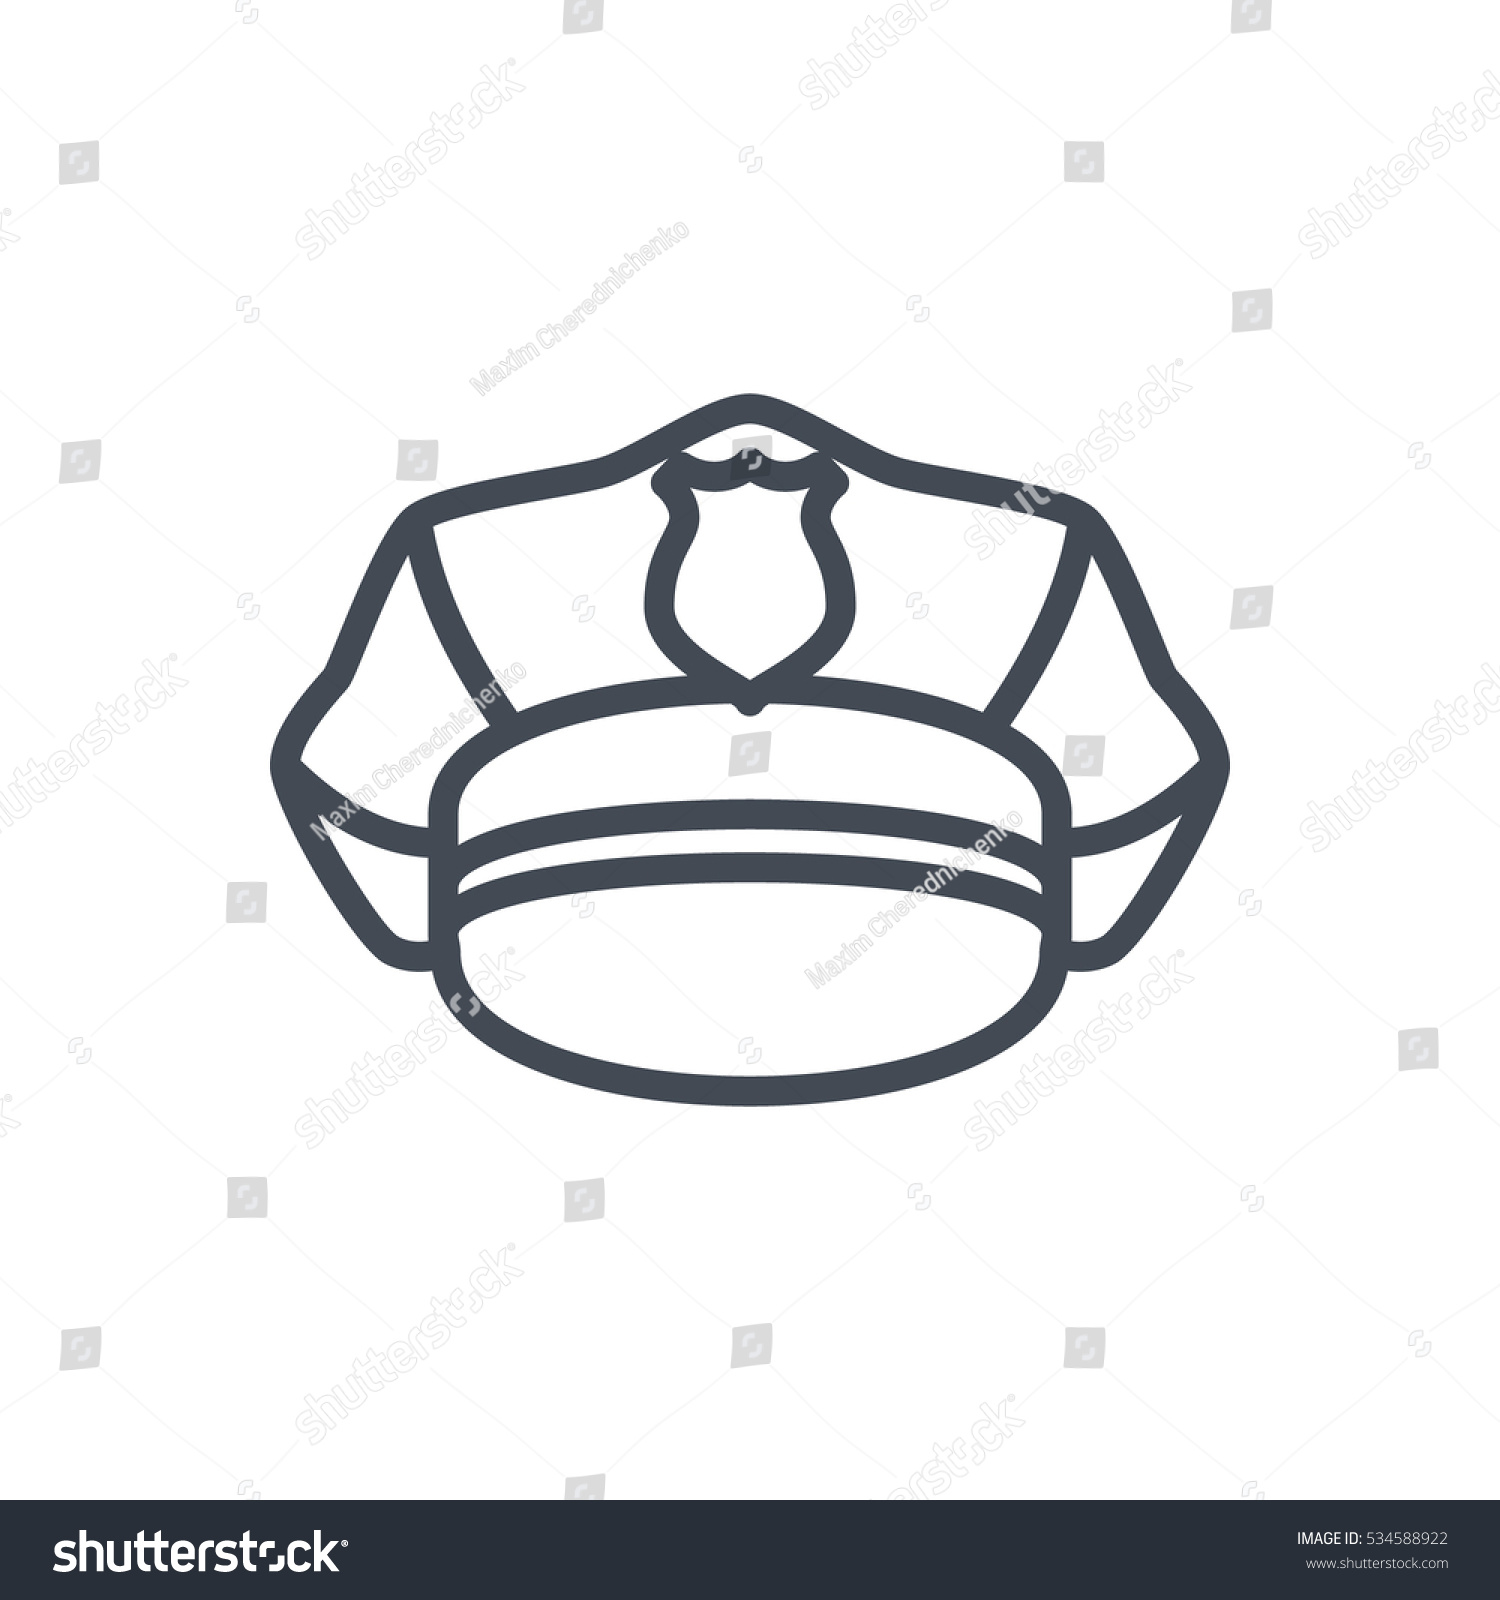 police hat clip art black and white - photo #27